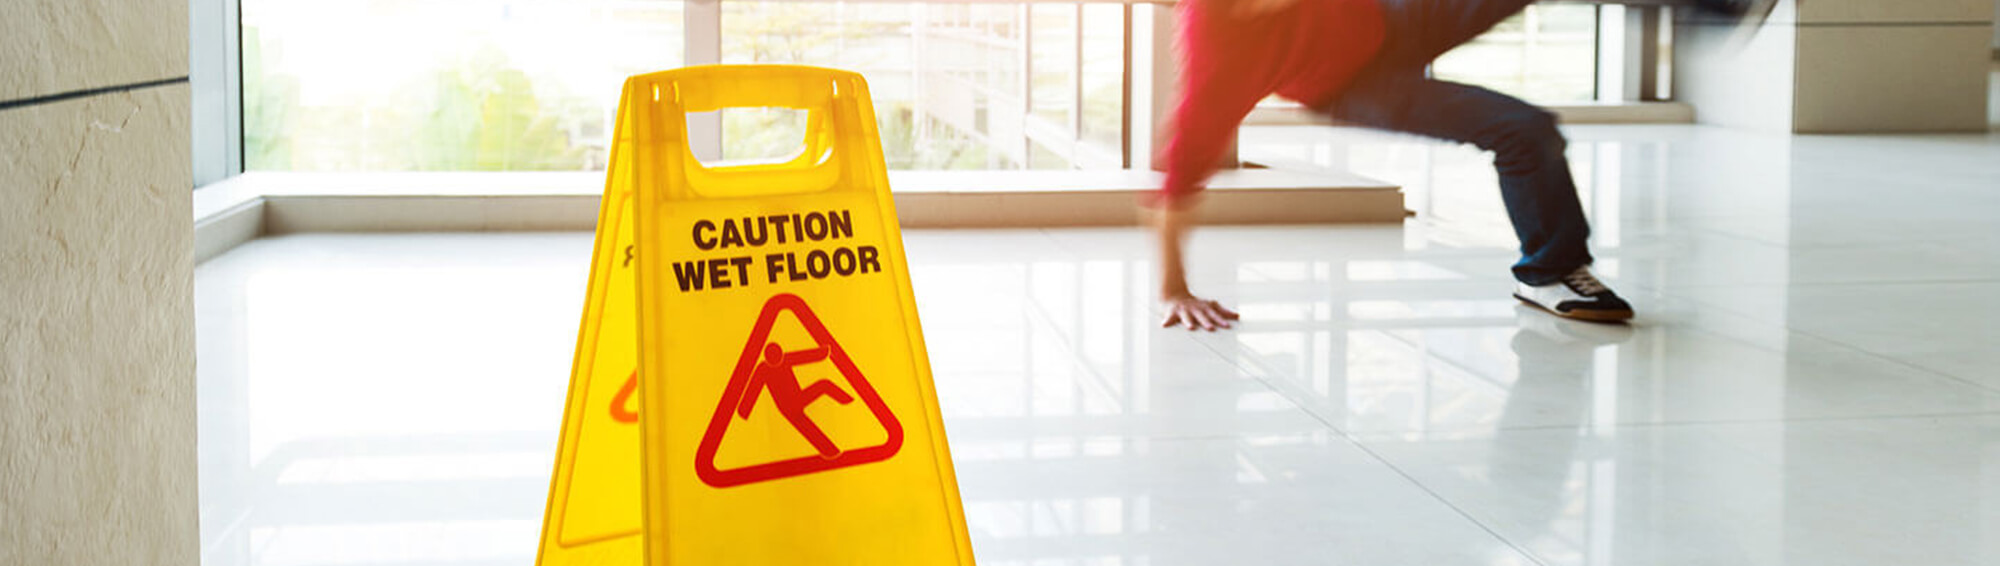 Slip and Fall in a Store? You May Be Eligible for Compensation.